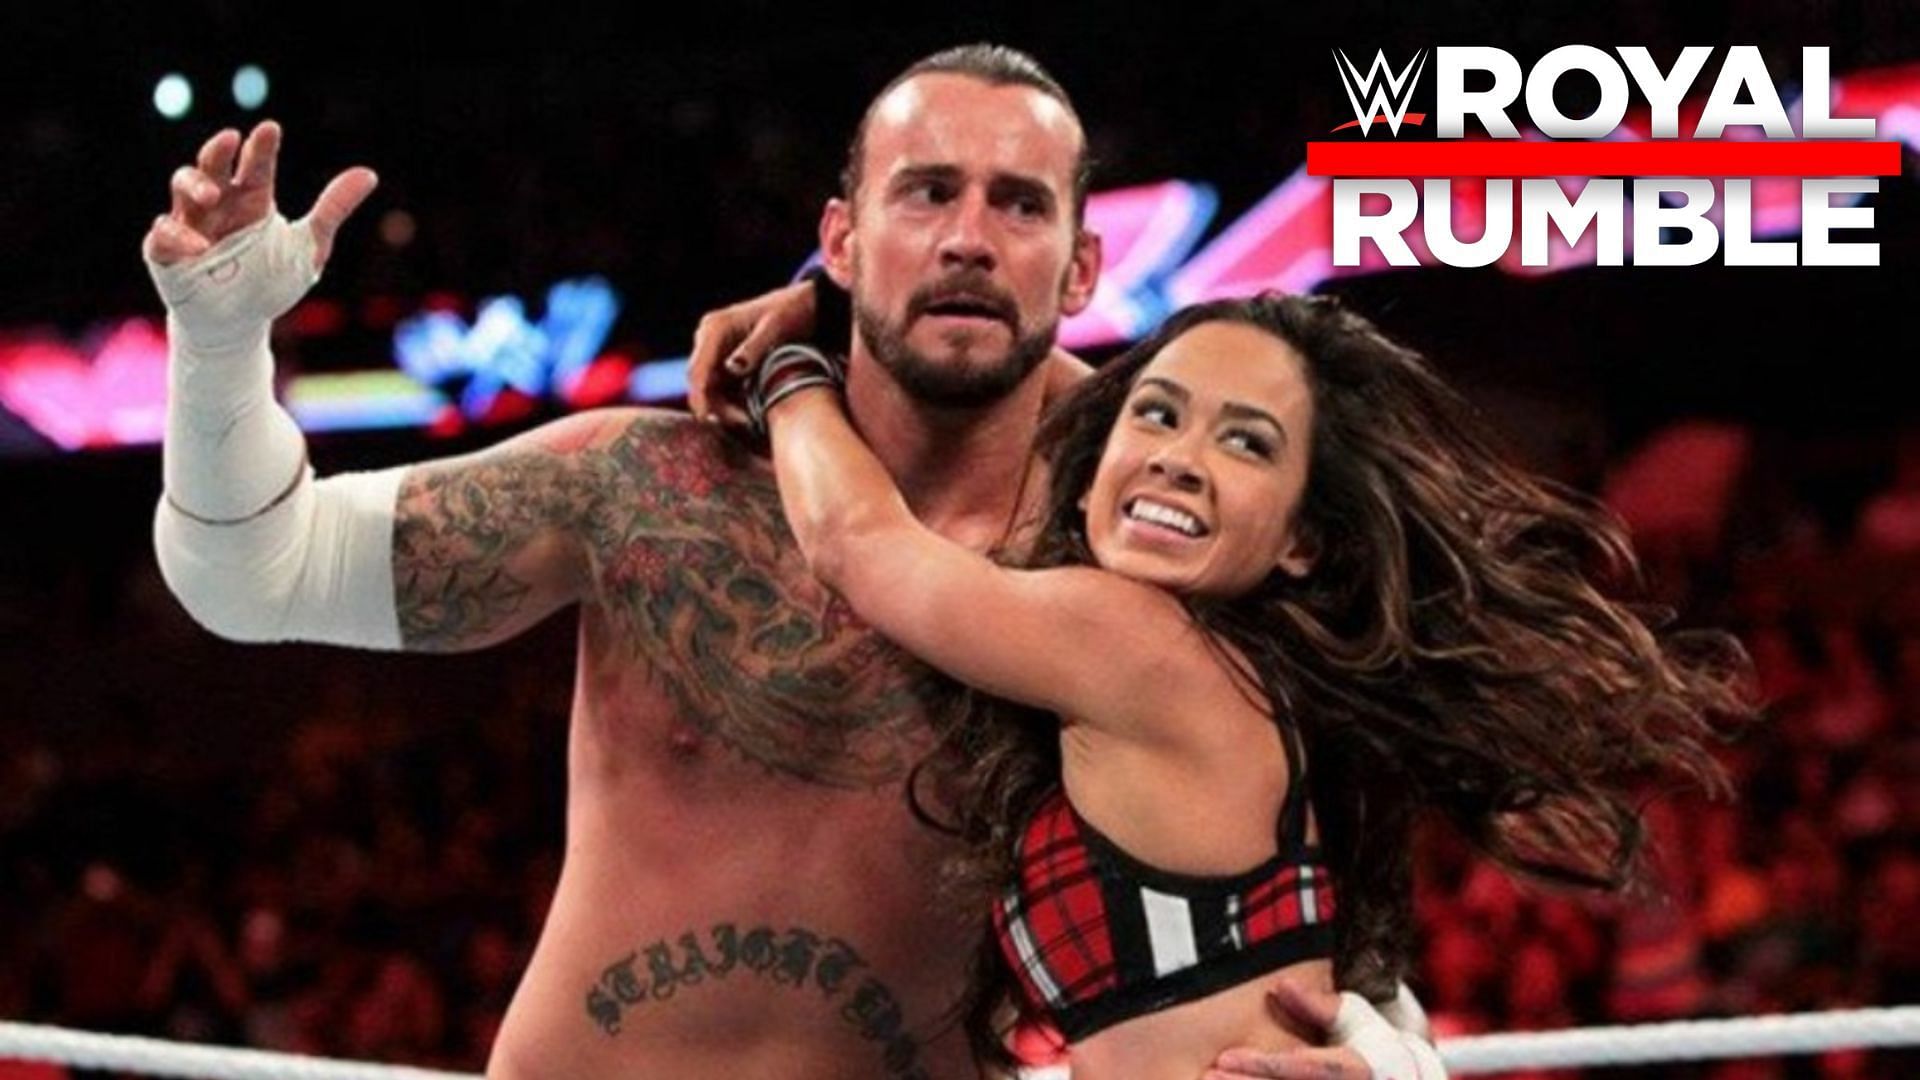 Will CM Punk and AJ Lee return to WWE?